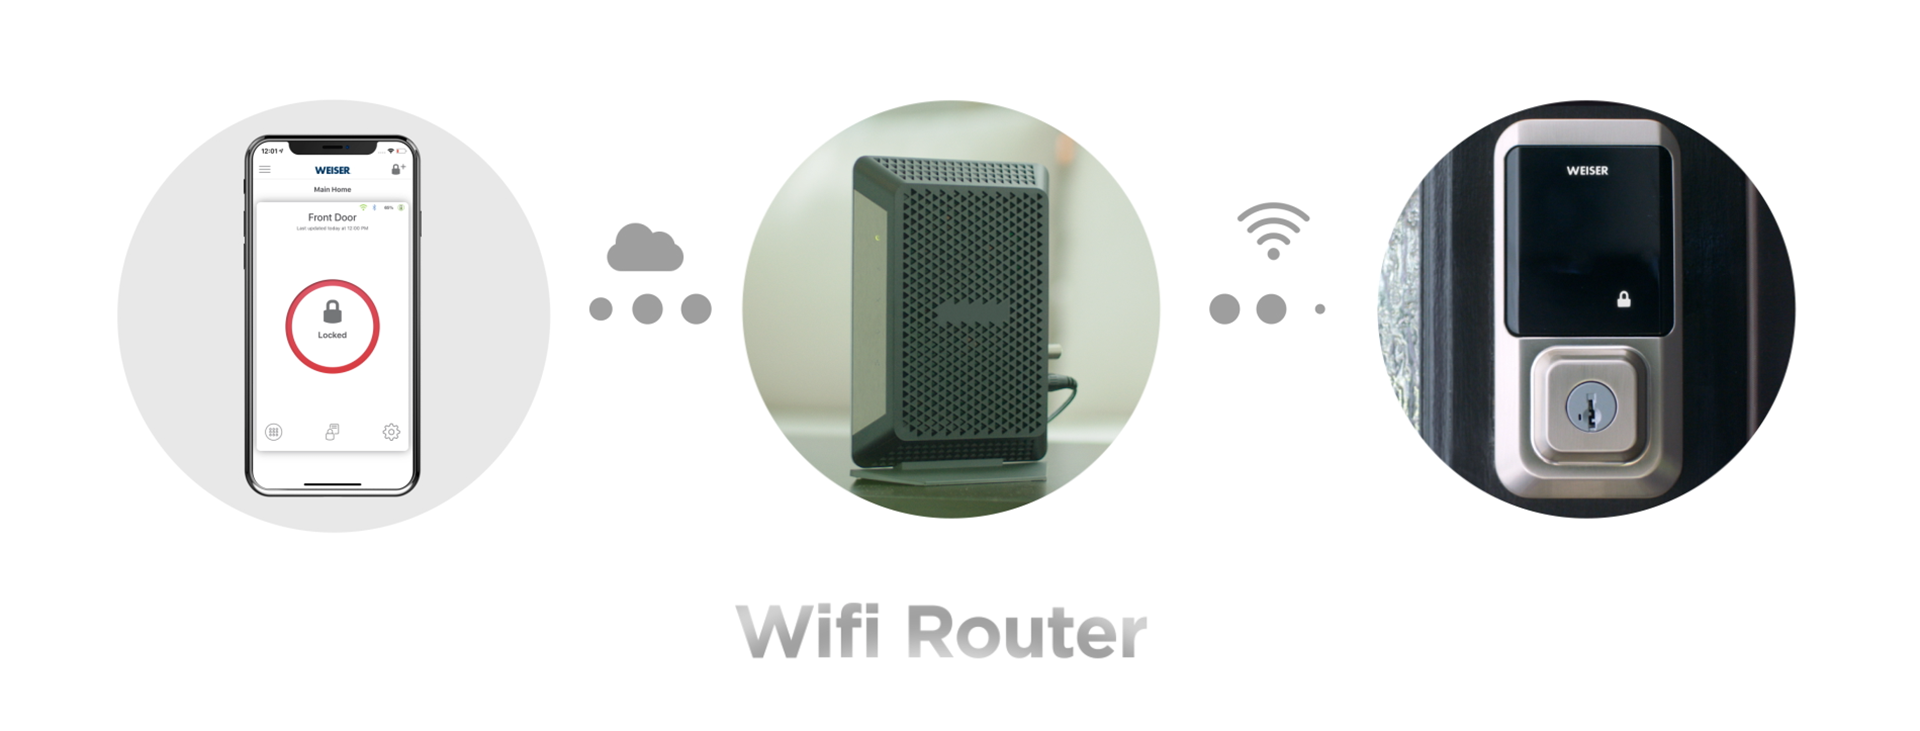 Phone Router Easy English